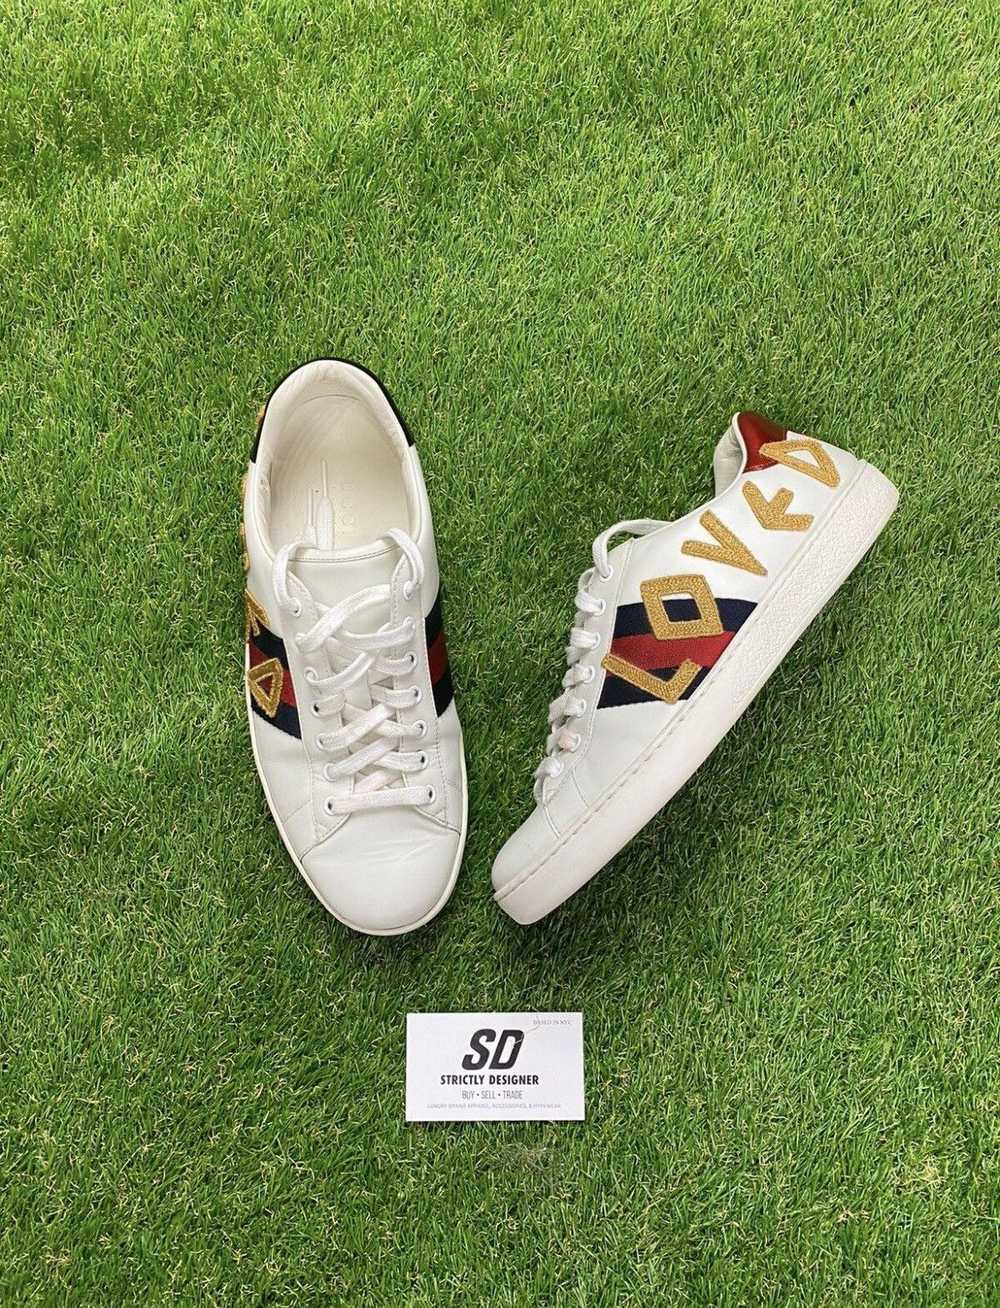 Designer × Gucci Gucci Ace “Loved” Shoes - image 2